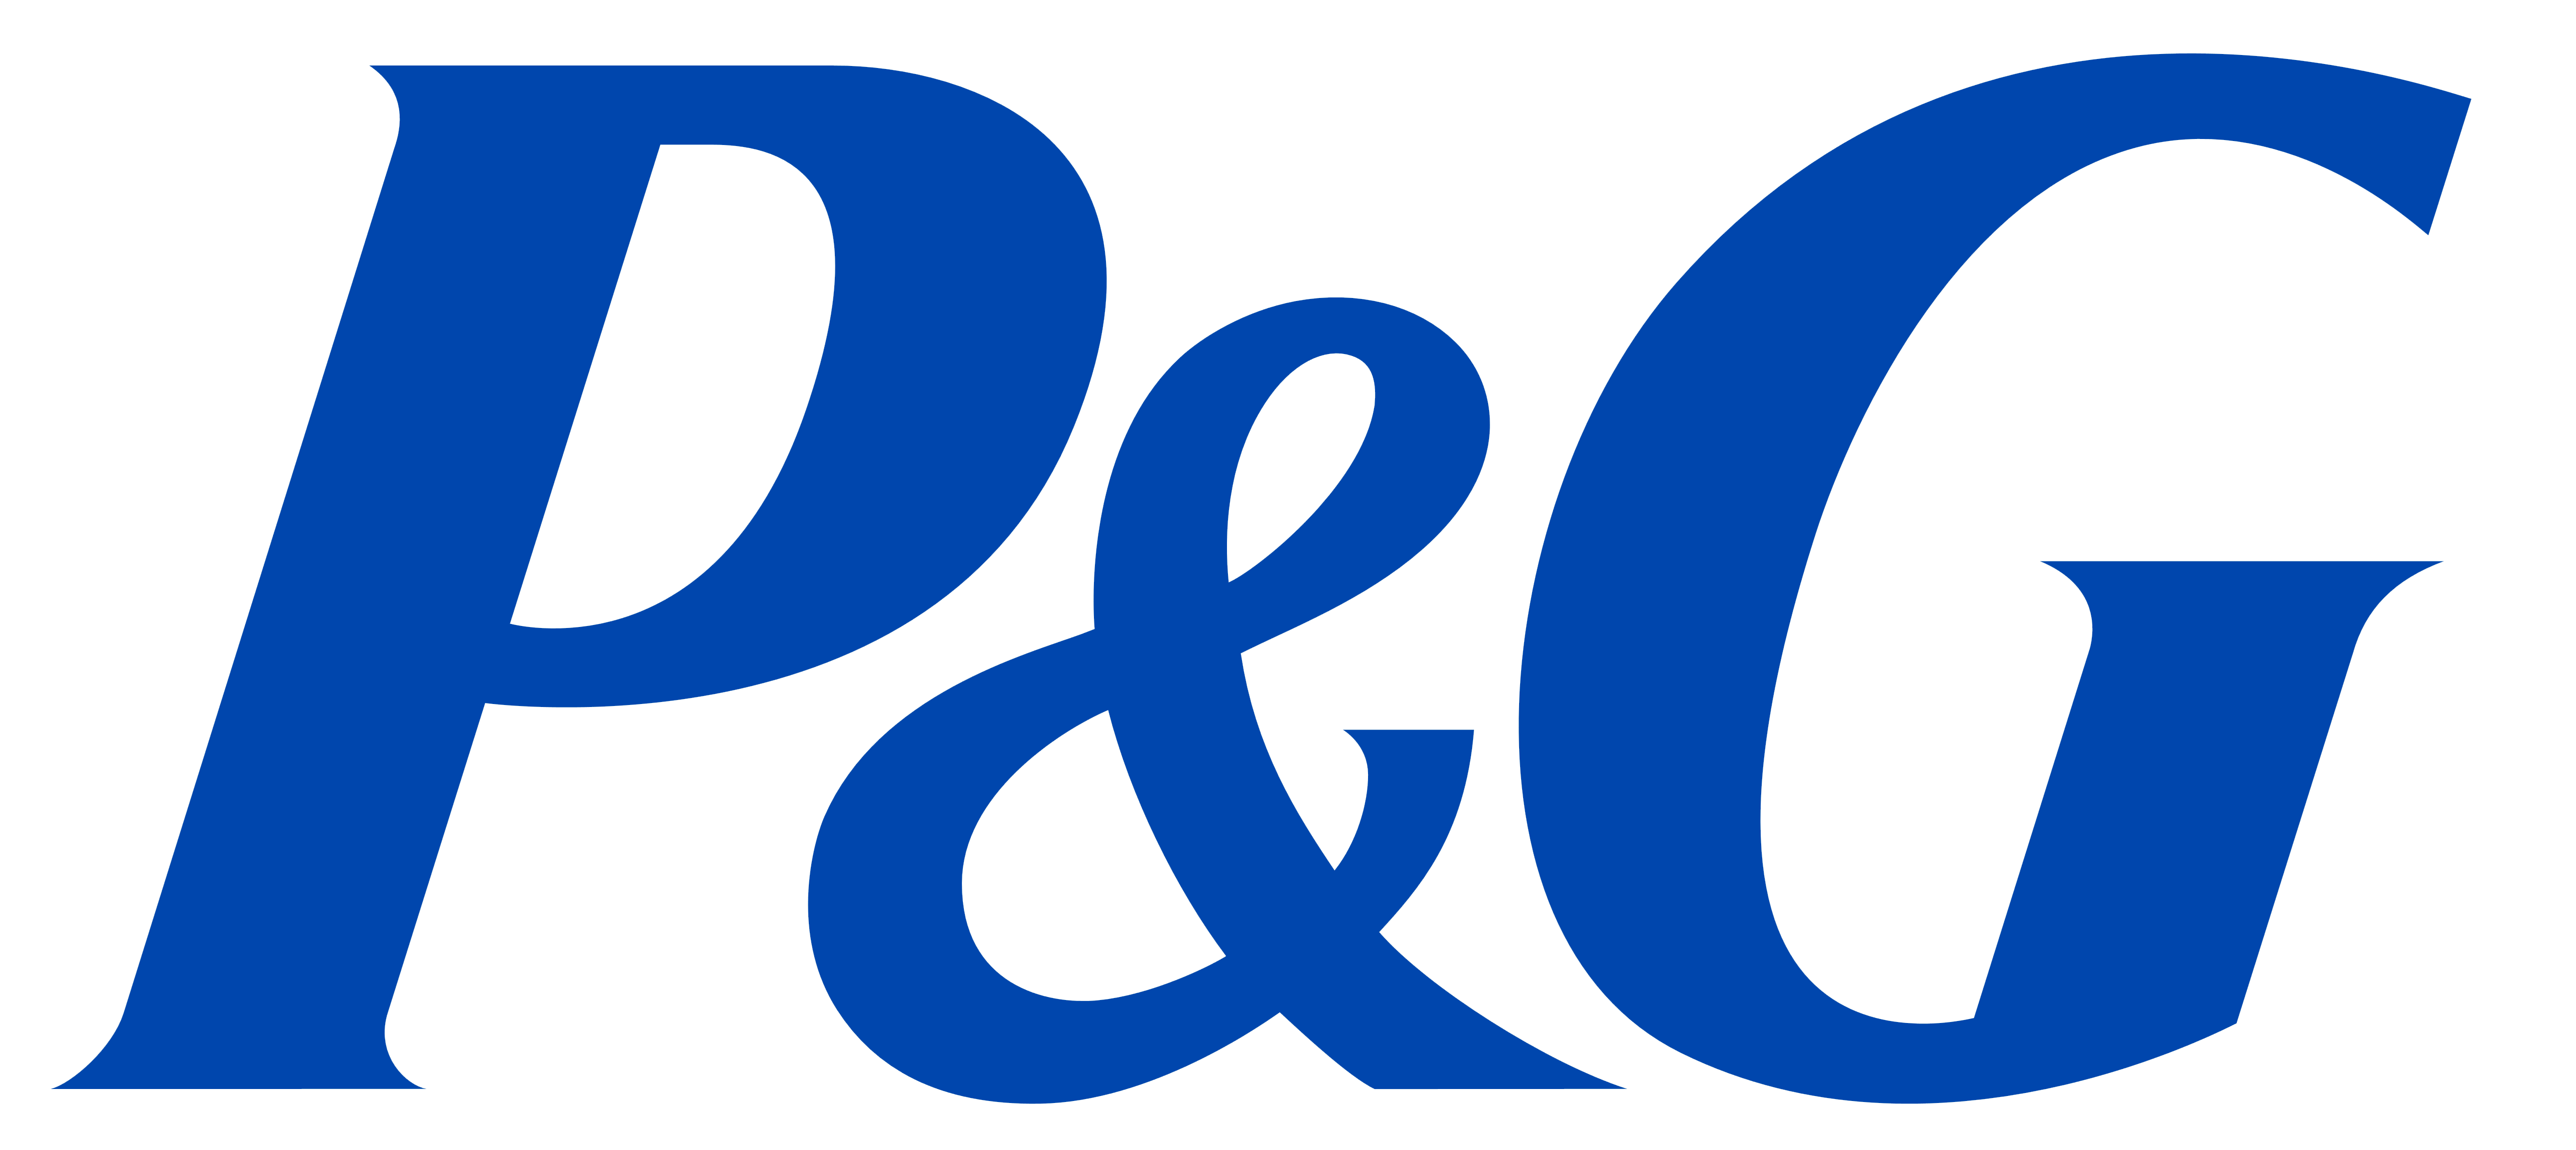 P_and_G_Procter_and_Gamble_logo